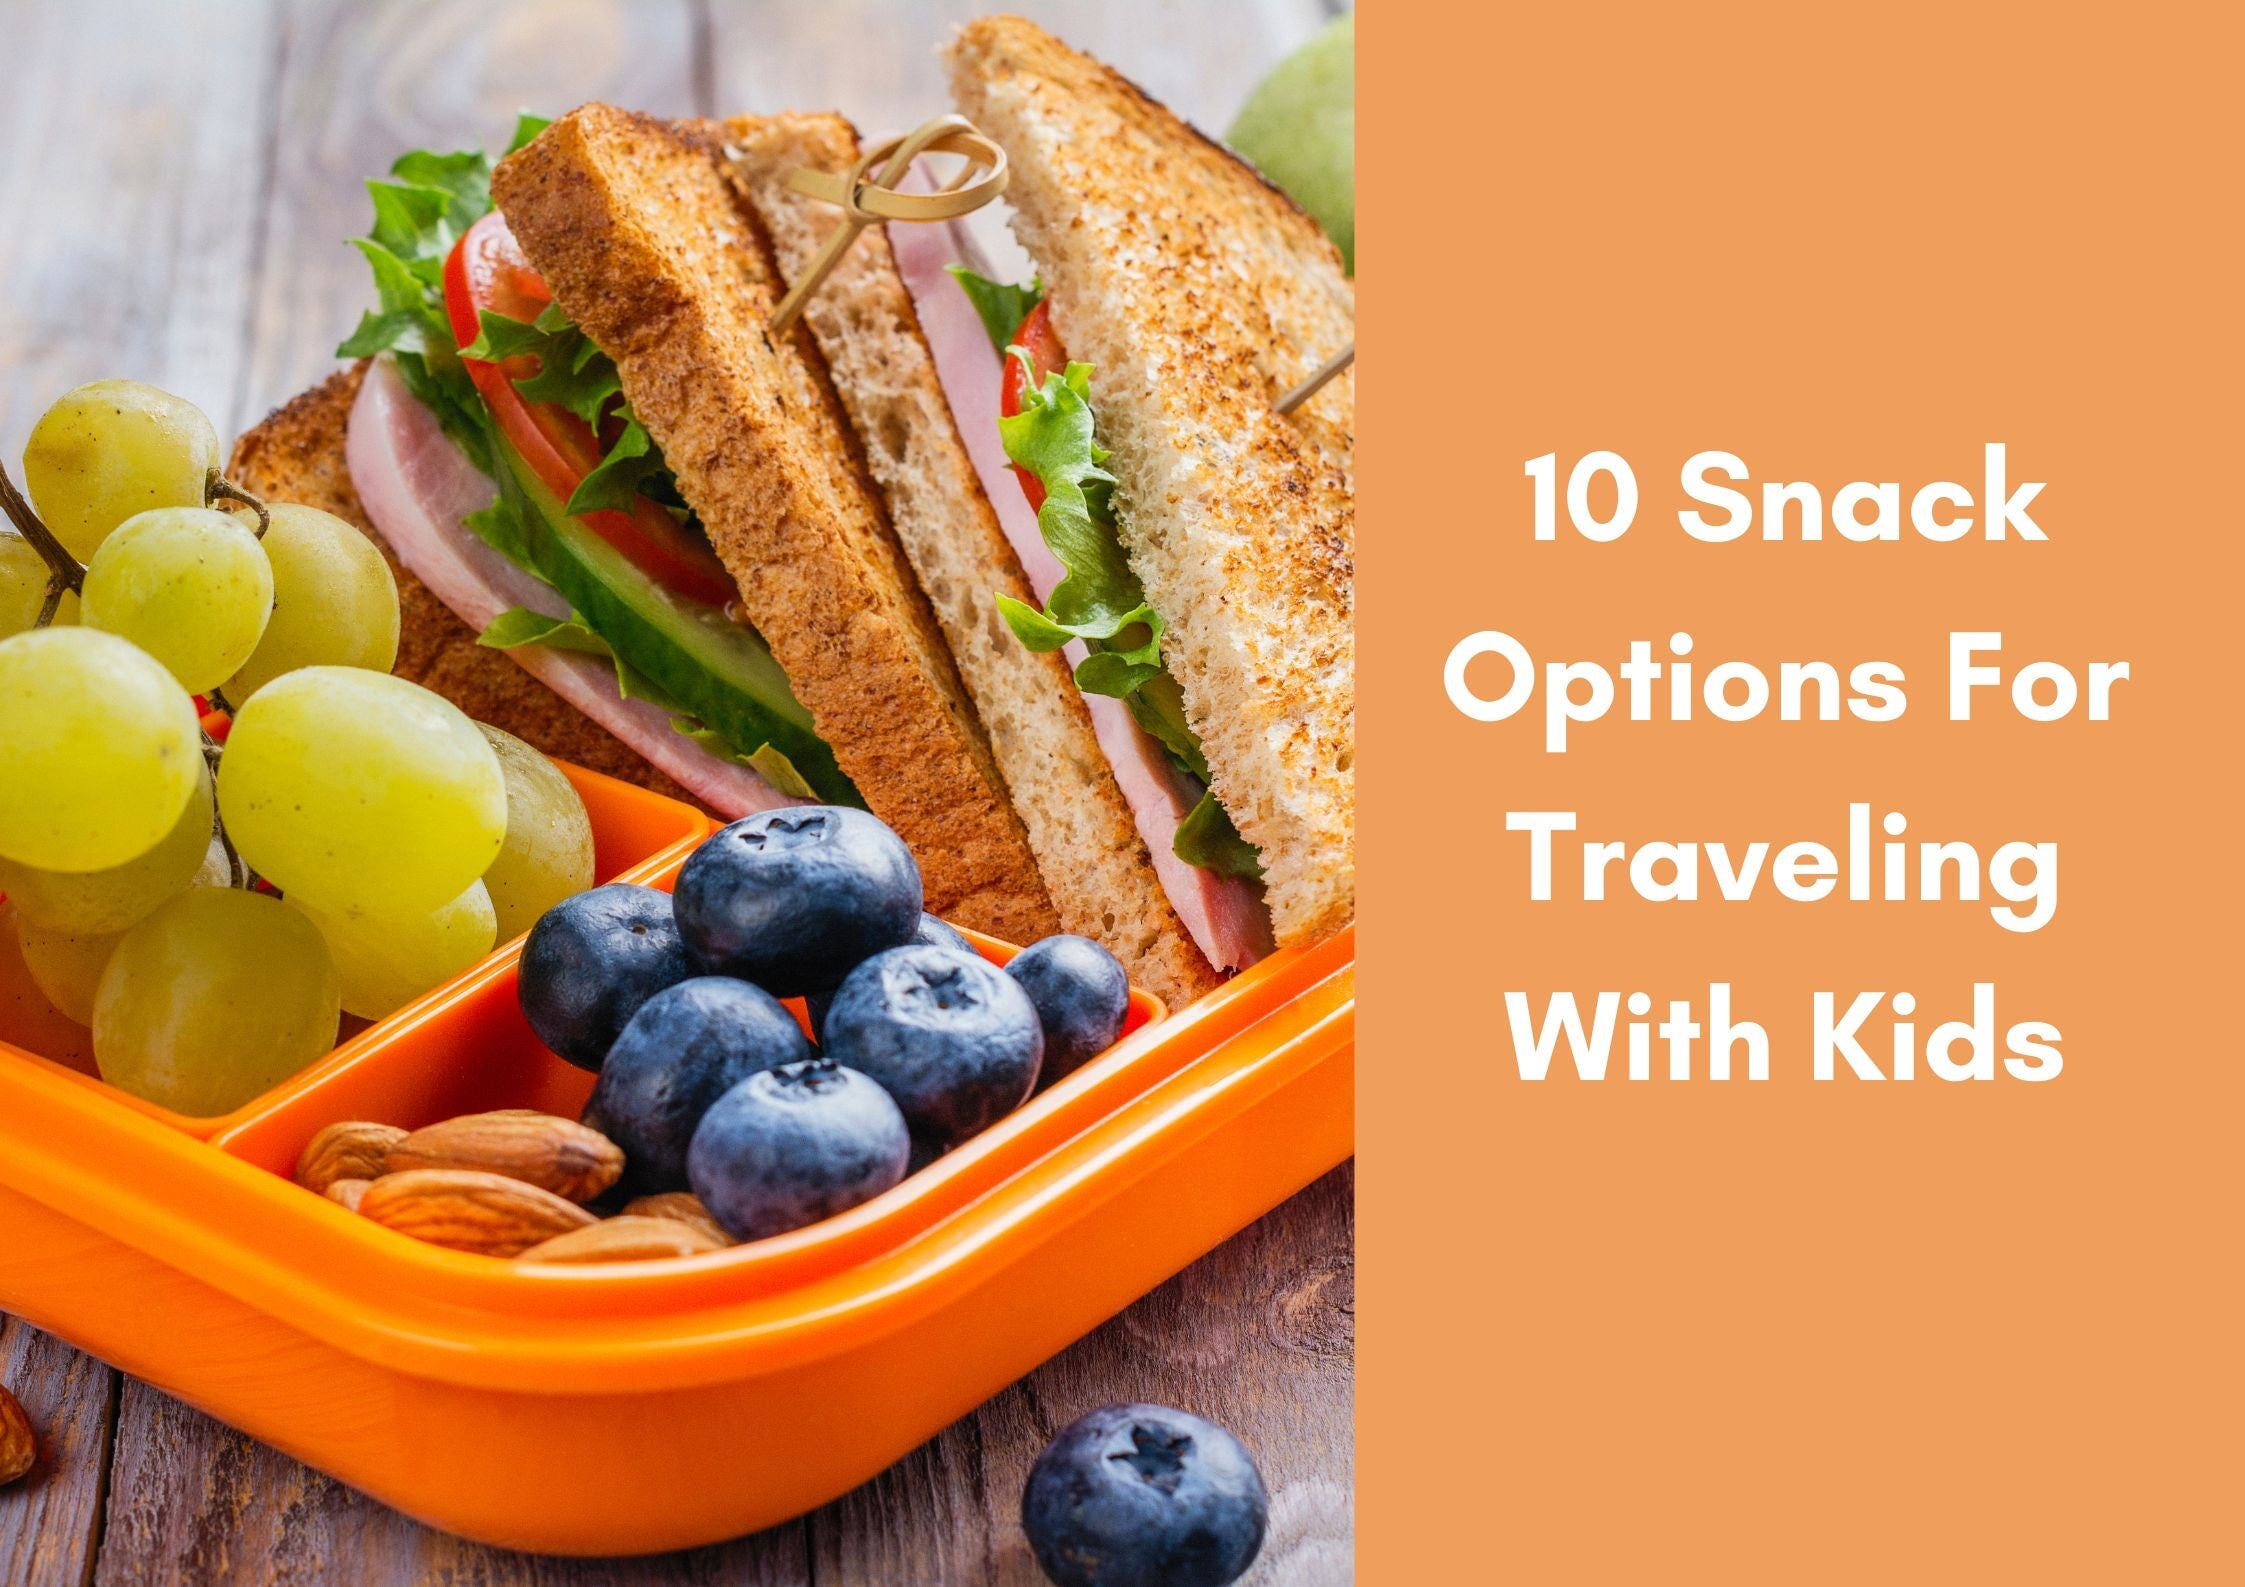 10 Snack Options For Traveling With Kids